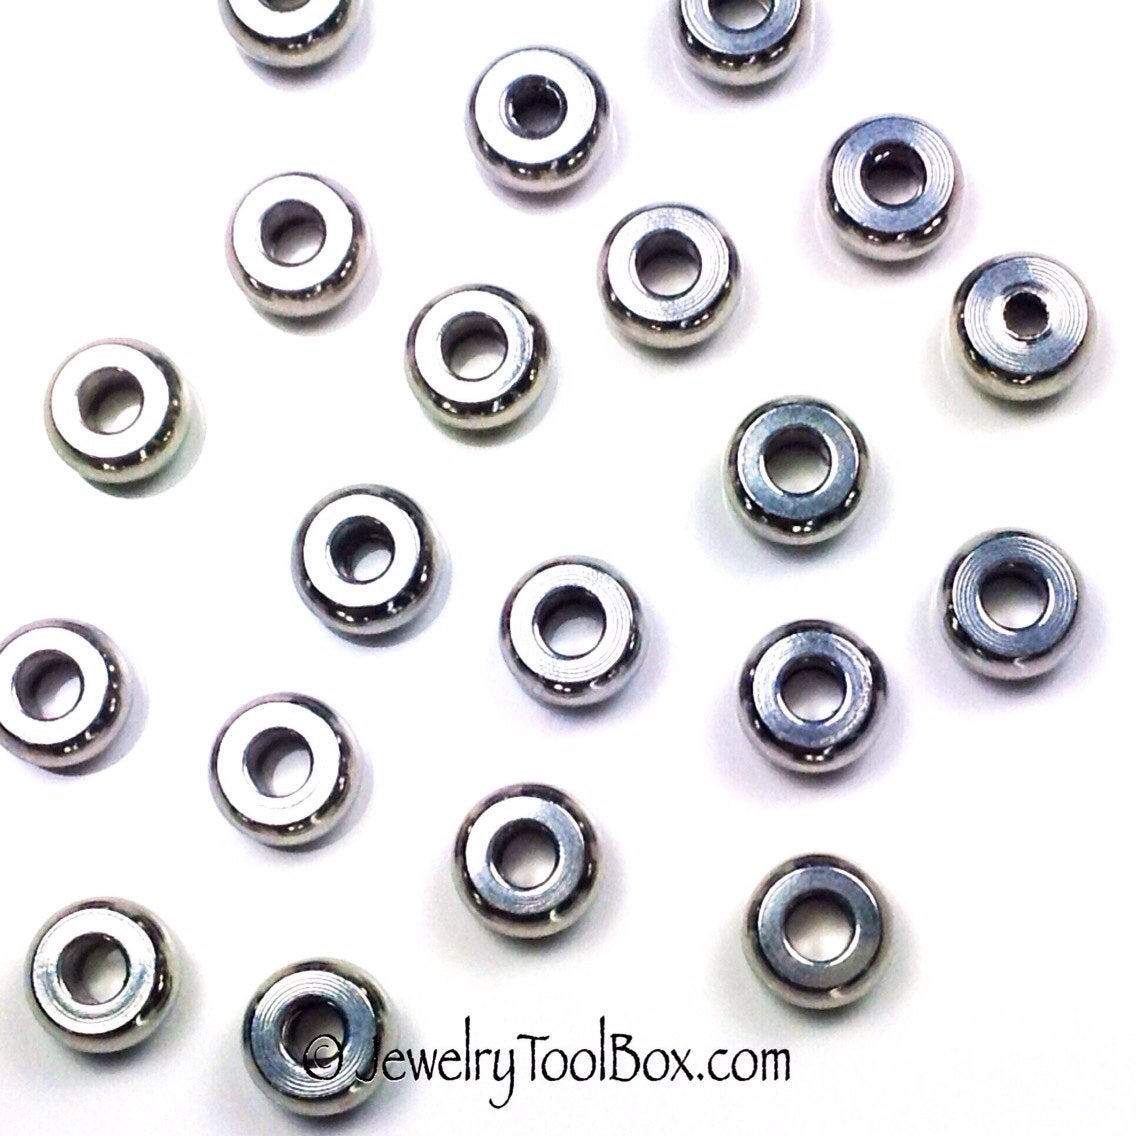 6mm Abacus Beads, Stainless Steel 6x3mm, 2mm Hole, Lot Size 200, #1532 -  Jewelry Tool Box